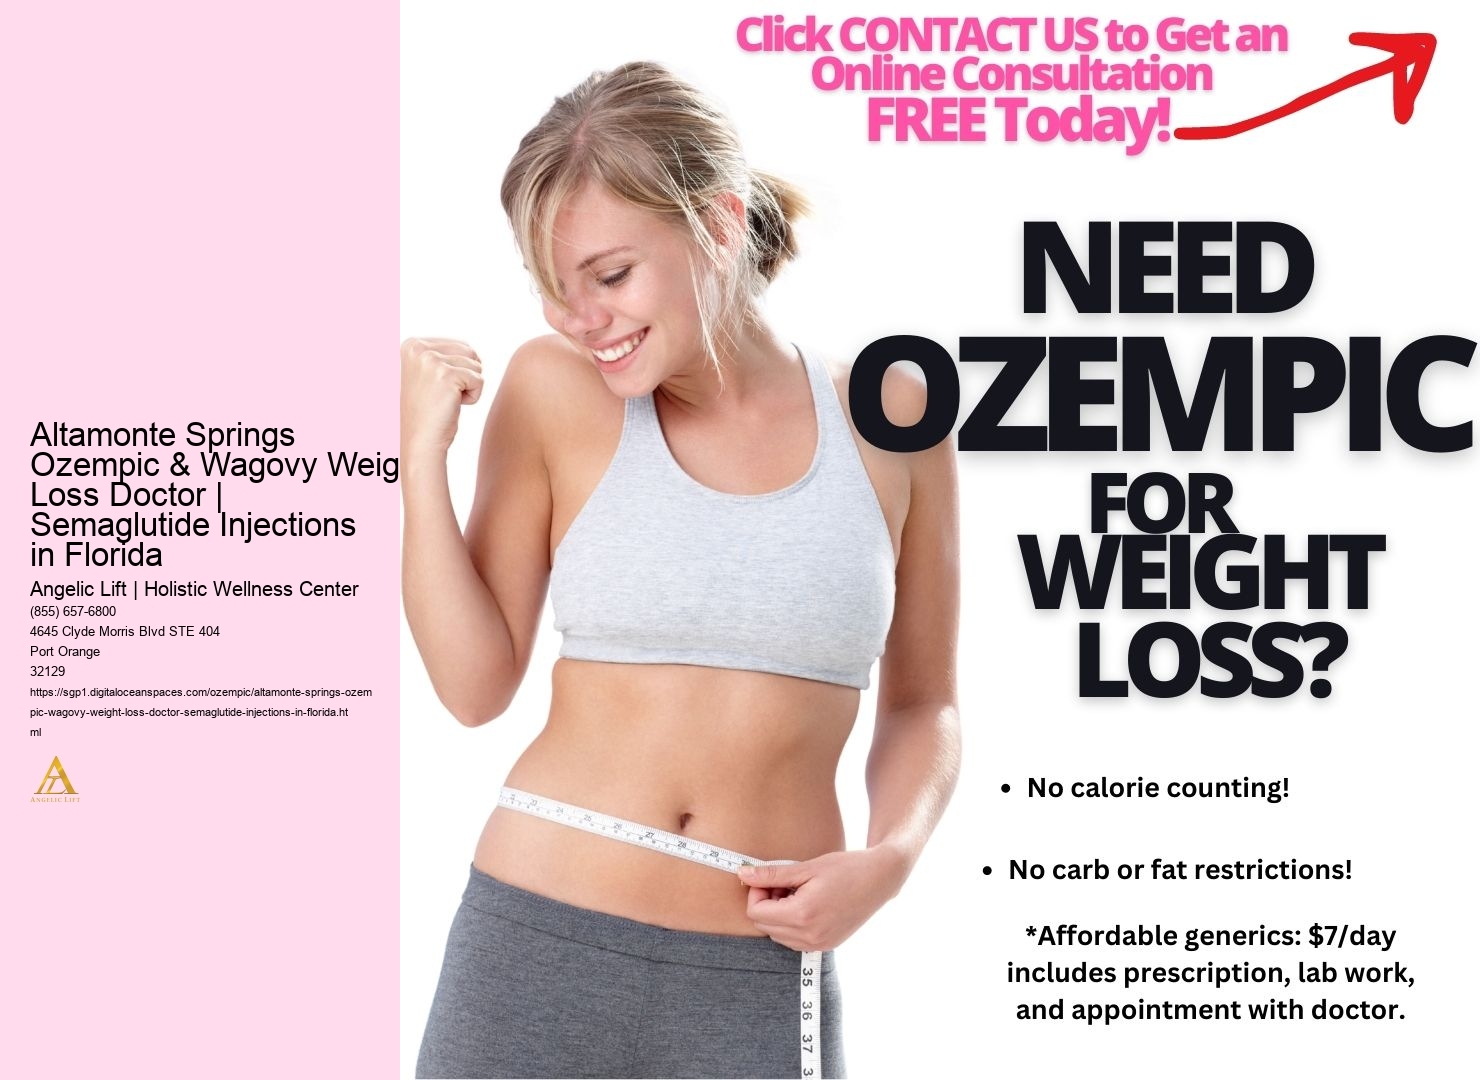 Altamonte Springs Ozempic & Wagovy Weight Loss Doctor | Semaglutide Injections in Florida